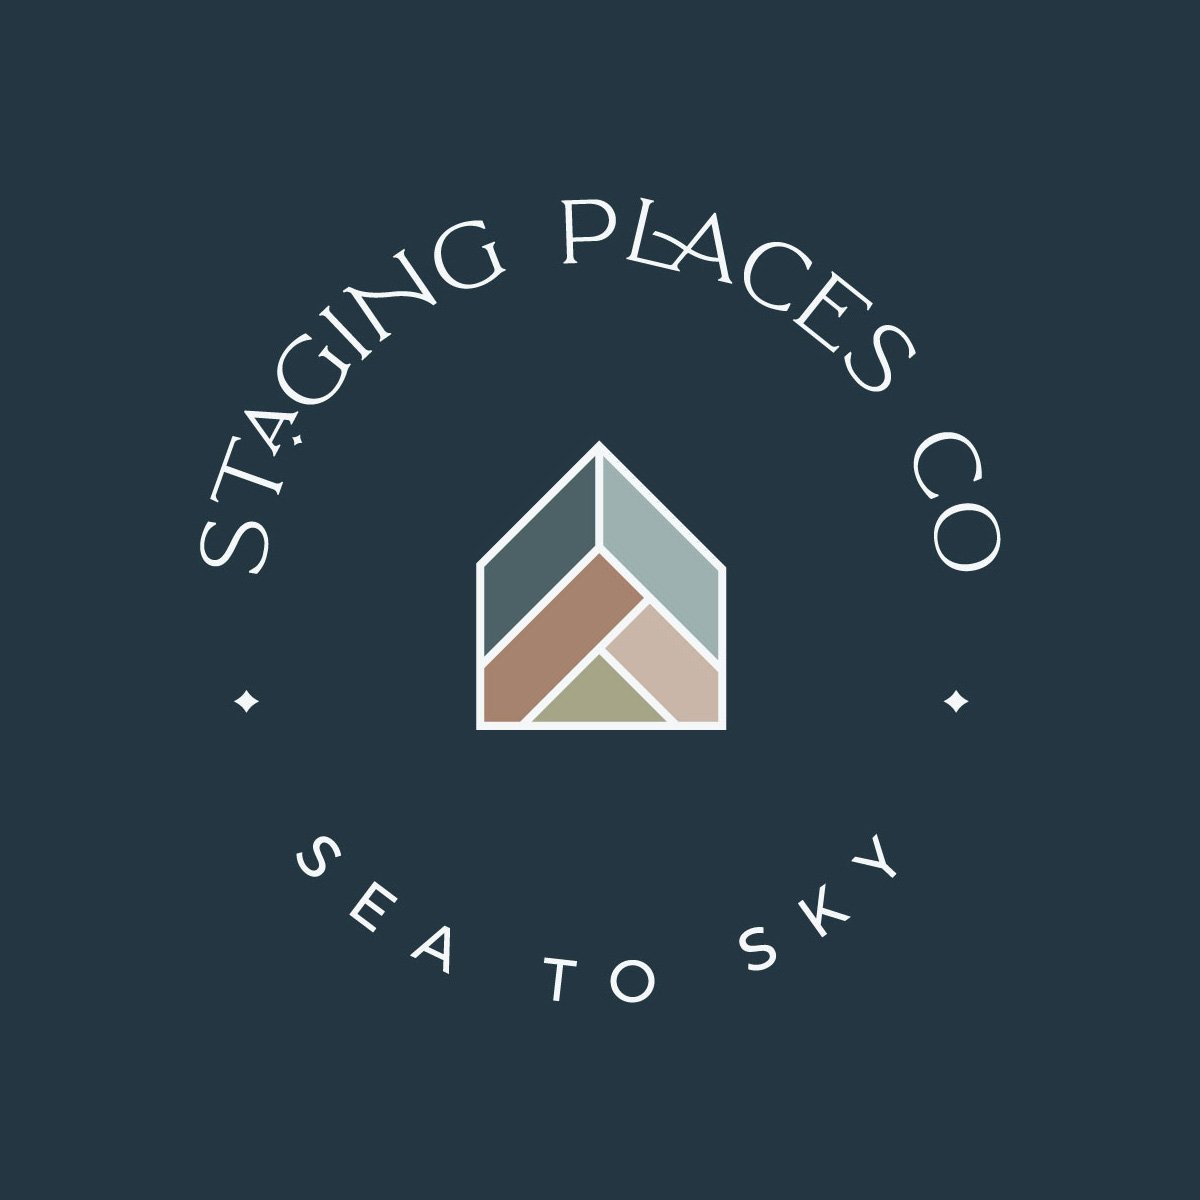 lindsay-mcghee-designs-staging-places-badge-blue